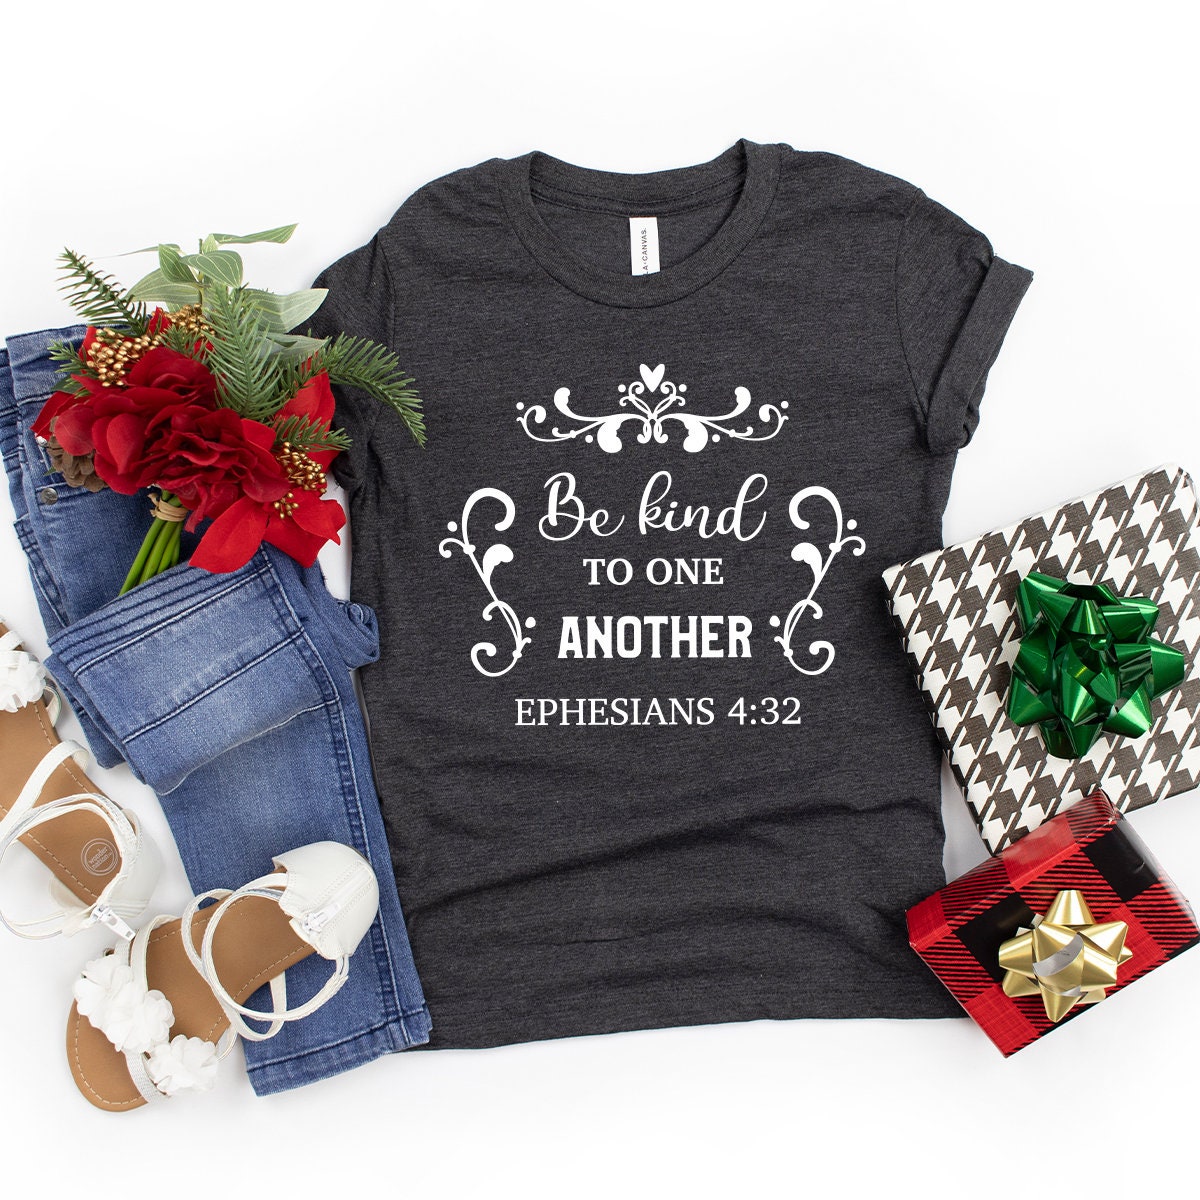 Be Kind To One Another Shirt, Ephesians 4:32 Shirt, God Saying Shirt, Christian T-Shirt, Be Kind Tee, Bible Verse Quote Shirt, Kindness Tee - Fastdeliverytees.com